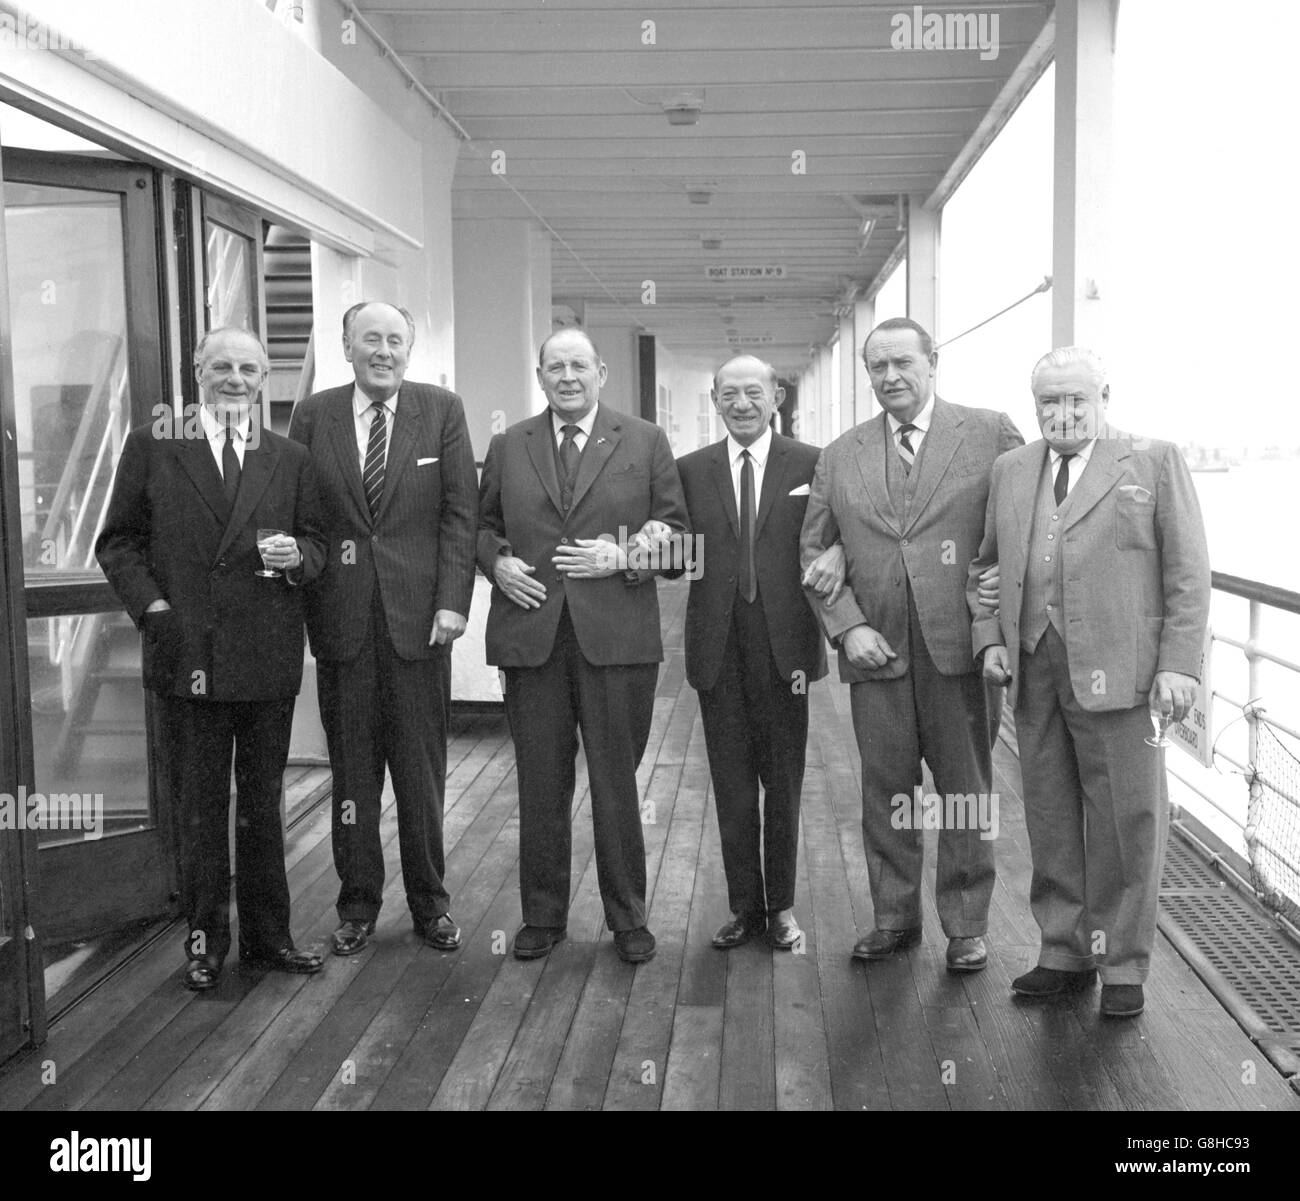 A wealthy line-up on the deck of the liner Windsor Castle at Southampton. They were sailing for South Africa. (l-r) Lieut-Col FL Orme, OBE, TD, Chairman of Royal Insurance, Sir John Reiss, Chairman of Associated Portland Cement and other companies, Owen Aisher, Chairman of the Marley Group, Jack Cohen, Chairman and founder of Tesco stores, Viscount Cobham, KG, GCMG, TD, Chairman of Cerebos and other companies, and FN Sutherland, CBE, Chairman of the Marconi Company. Stock Photo